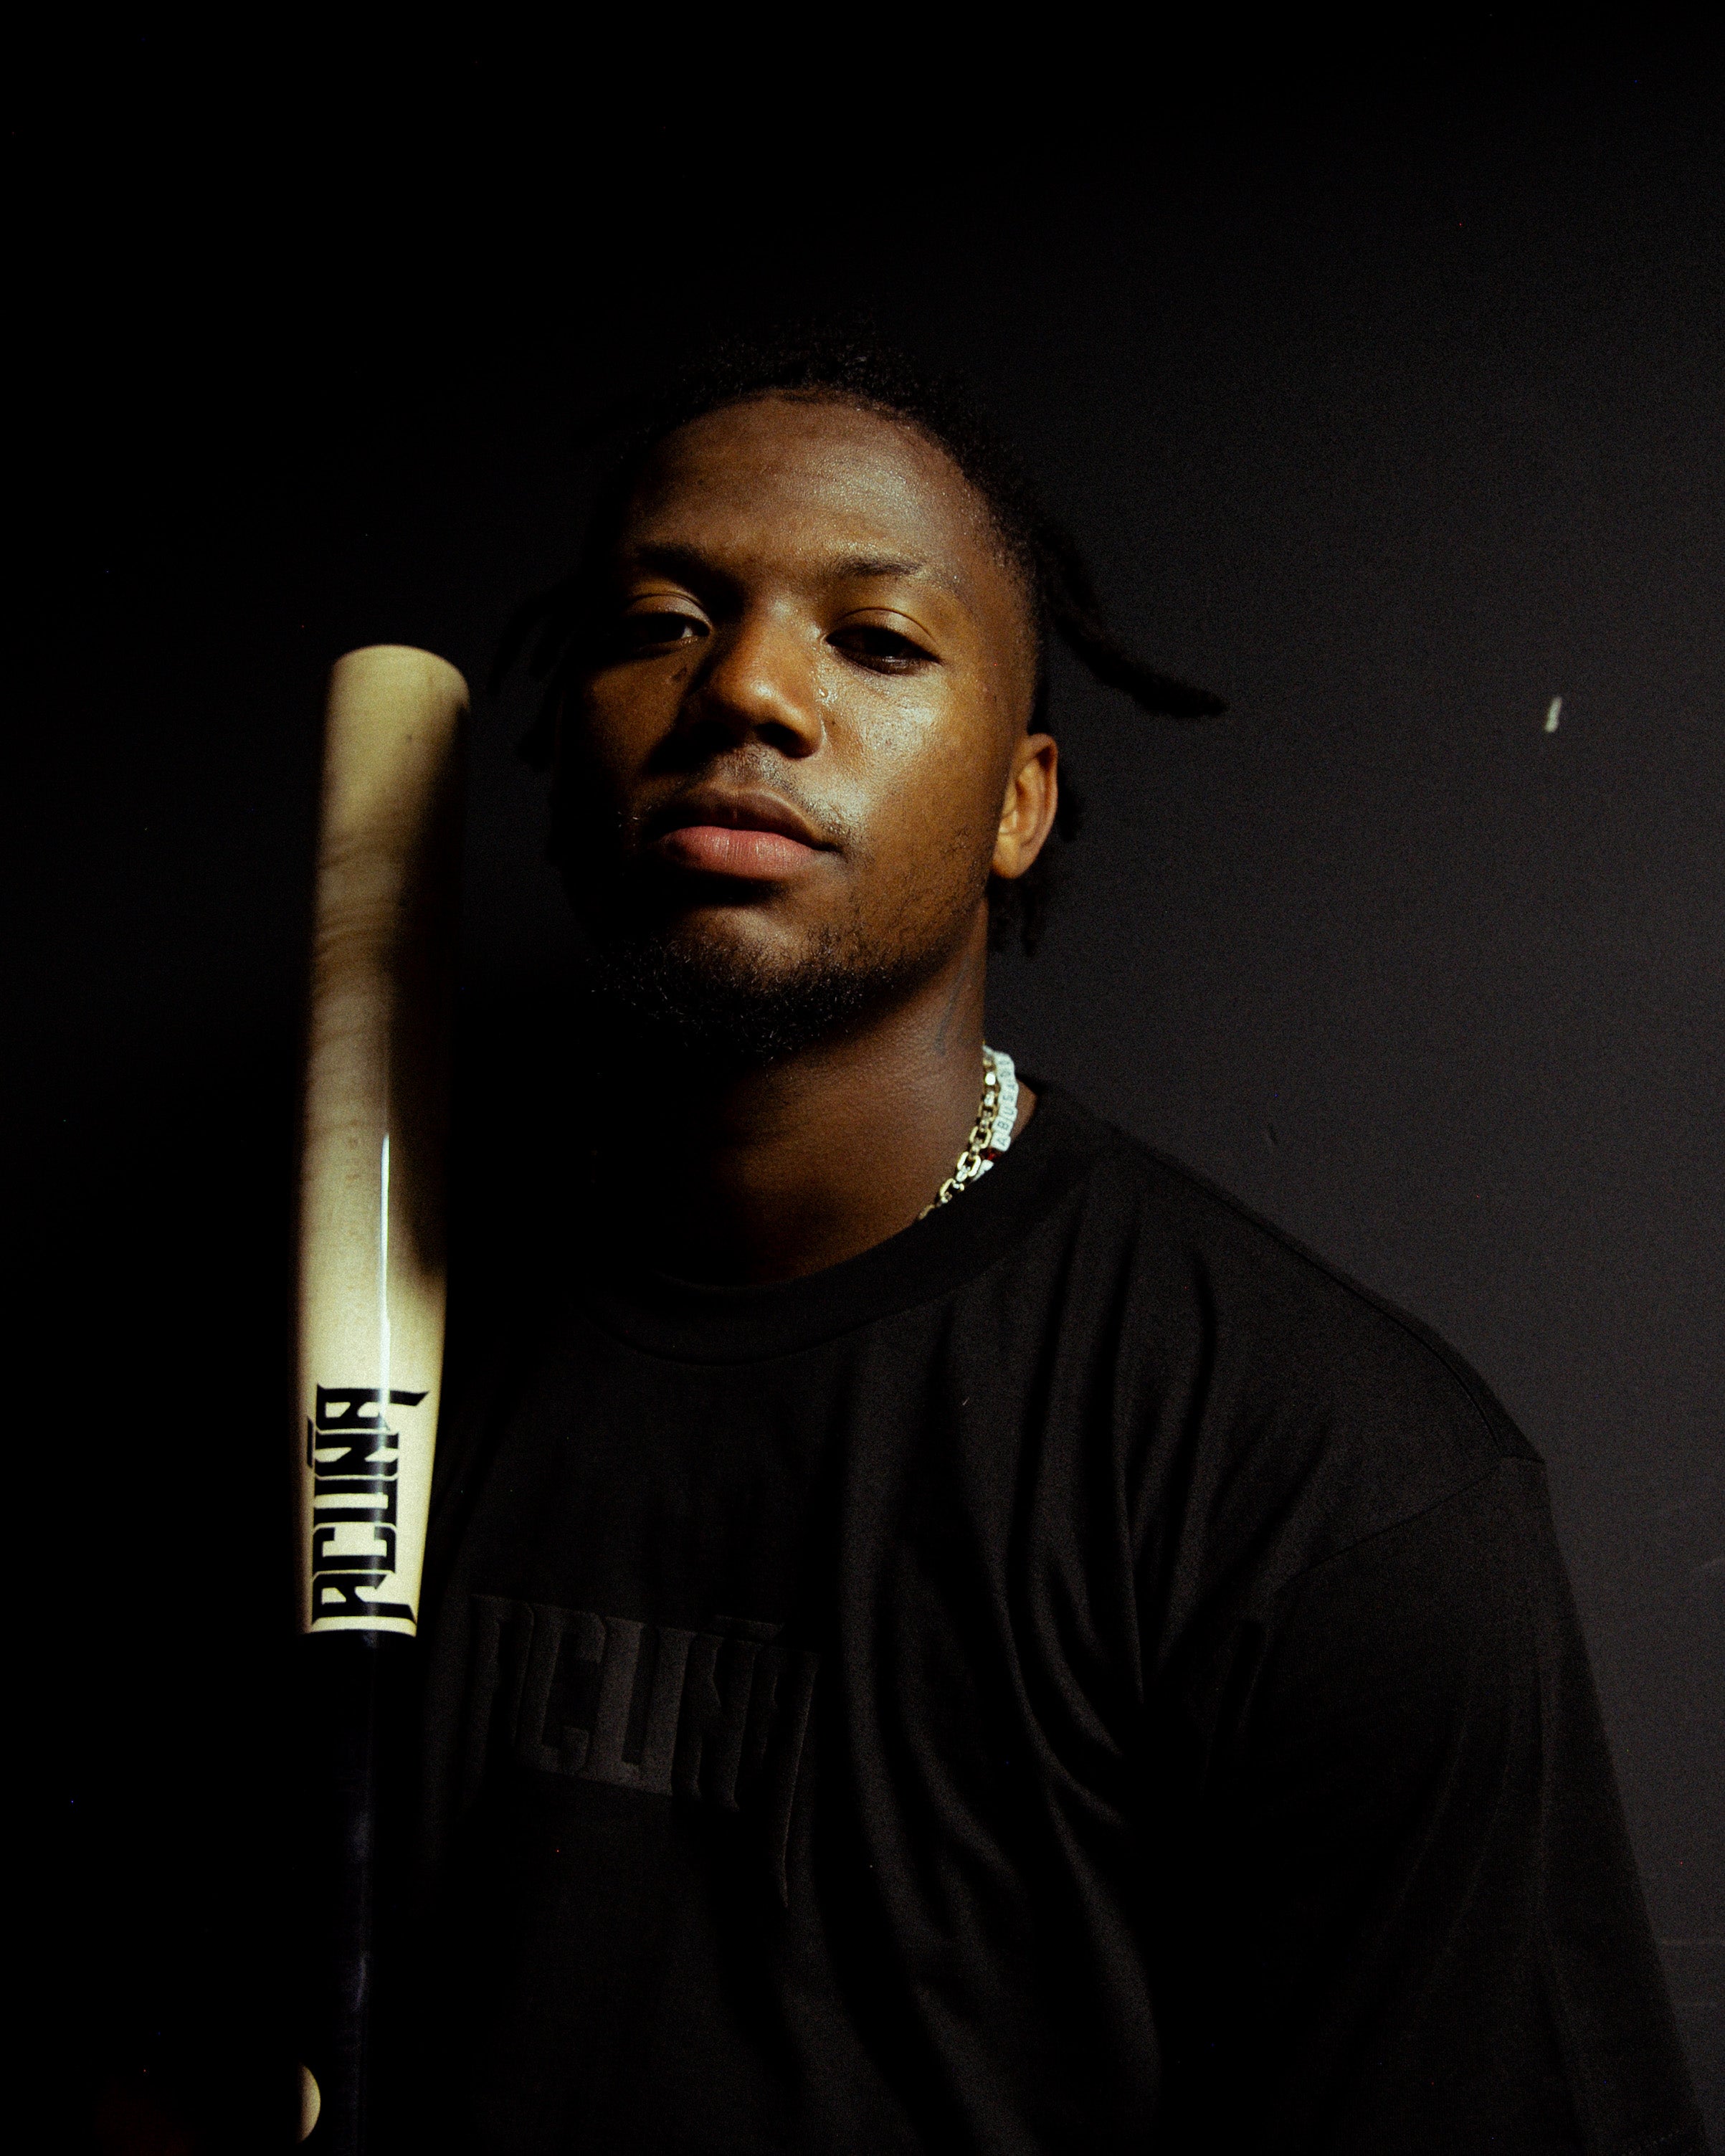 Ronald Acuña wearing a black tee shirt and holding a baseball bat with the "Acuña" logo on it